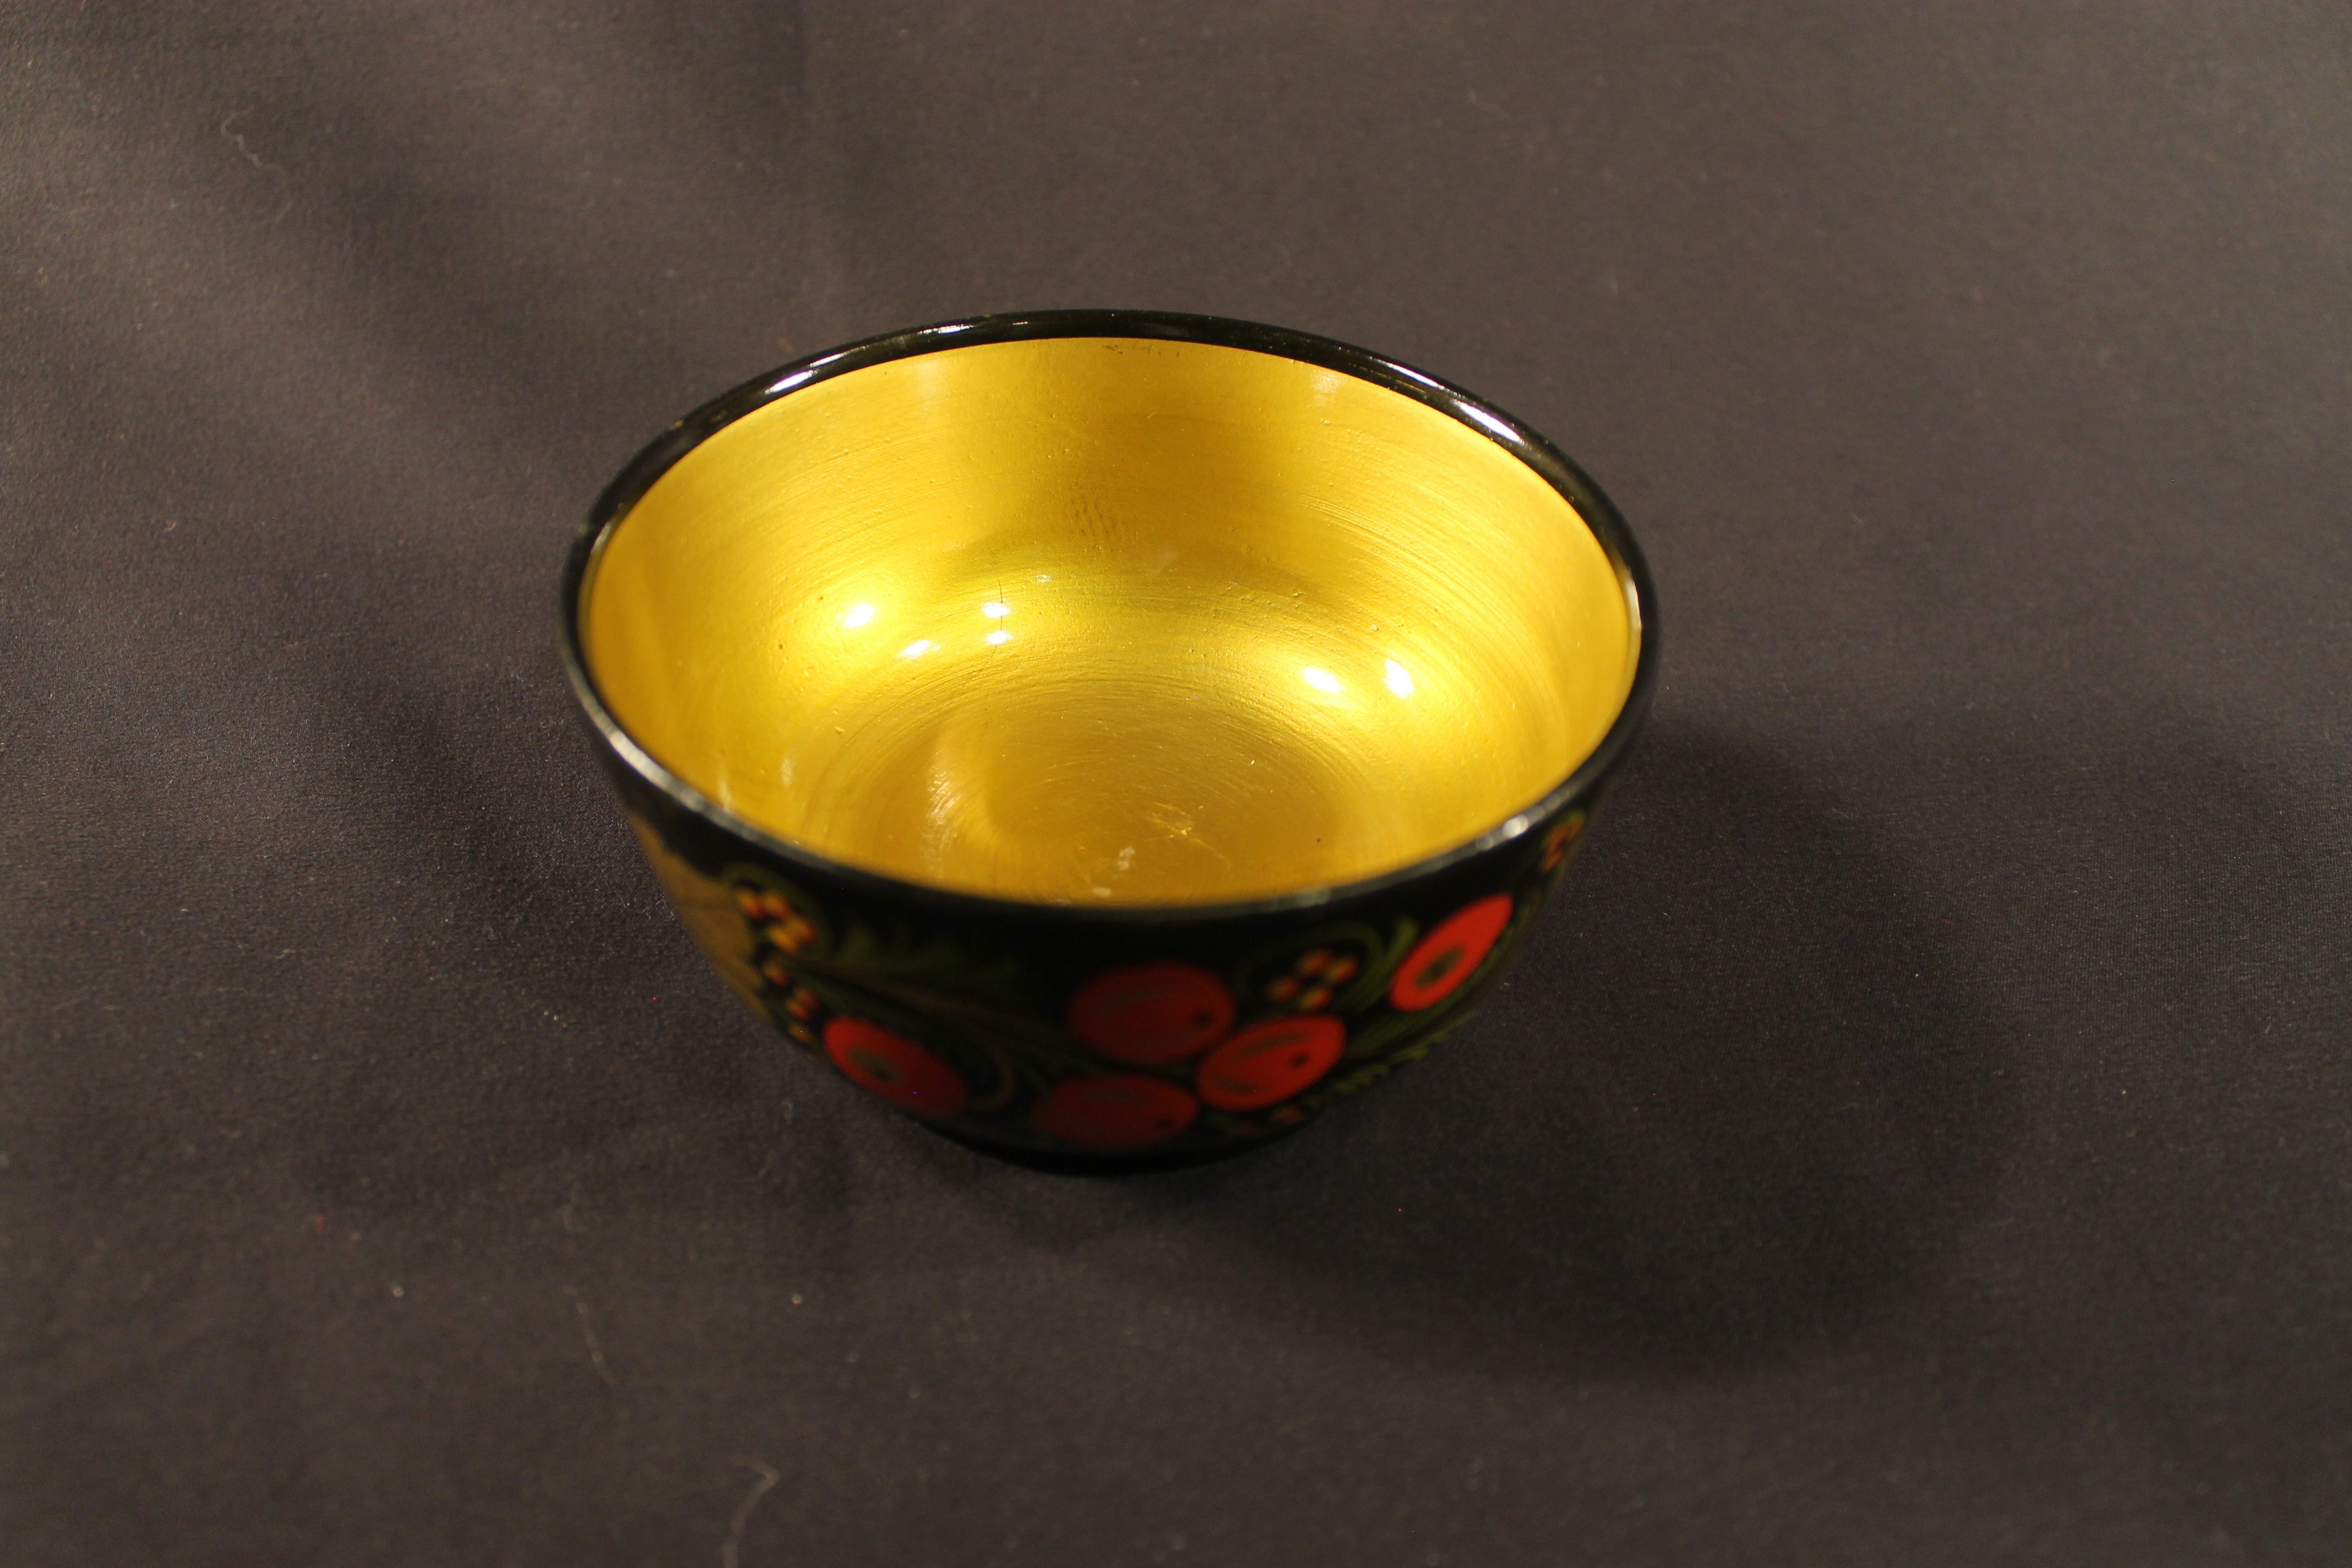 Small black lacquer bowl with interior gold. The exterior black has painted gold leaves, red apples, green grass design.